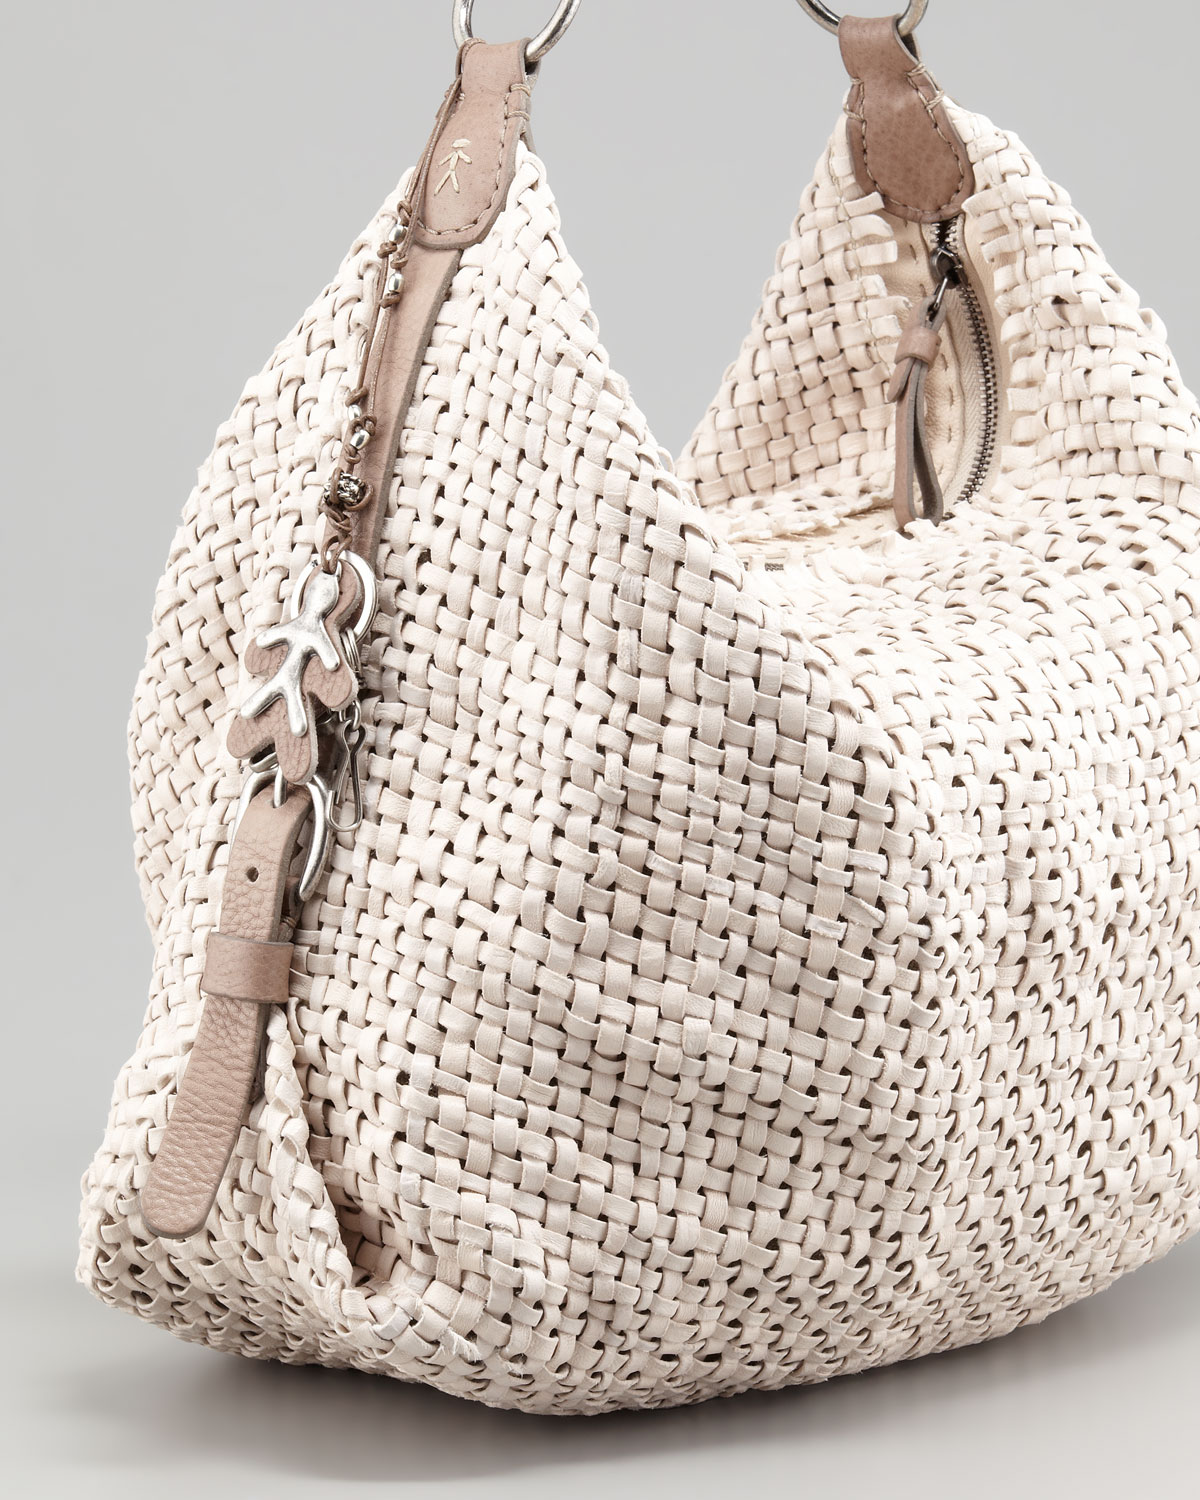 Lyst - Henry Beguelin Woven Leather Hobo Bag in Natural